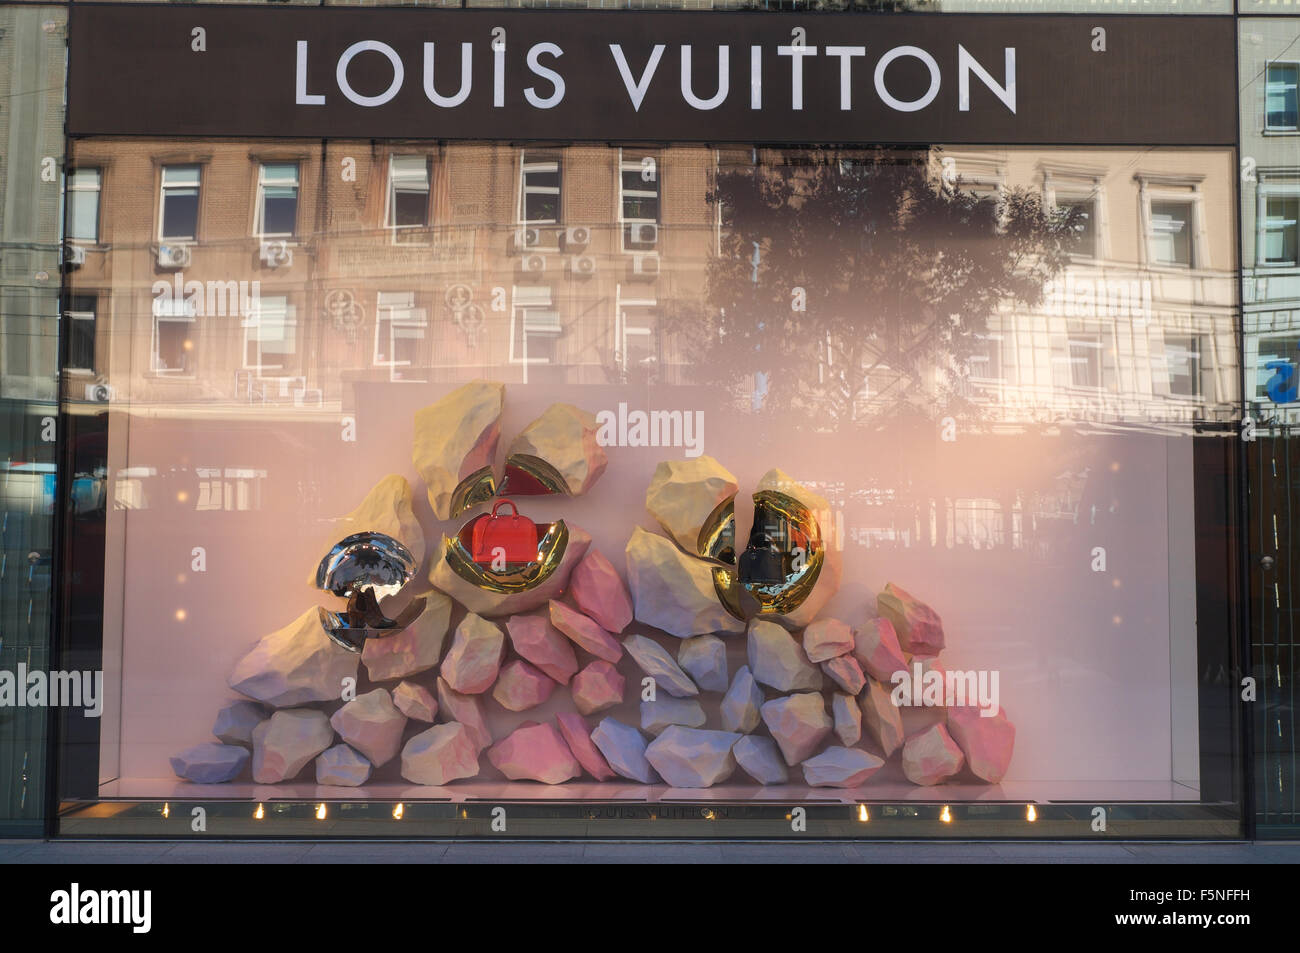 Louis Vuitton shop store window display of shoes and handbags on Al Stock Photo - Alamy